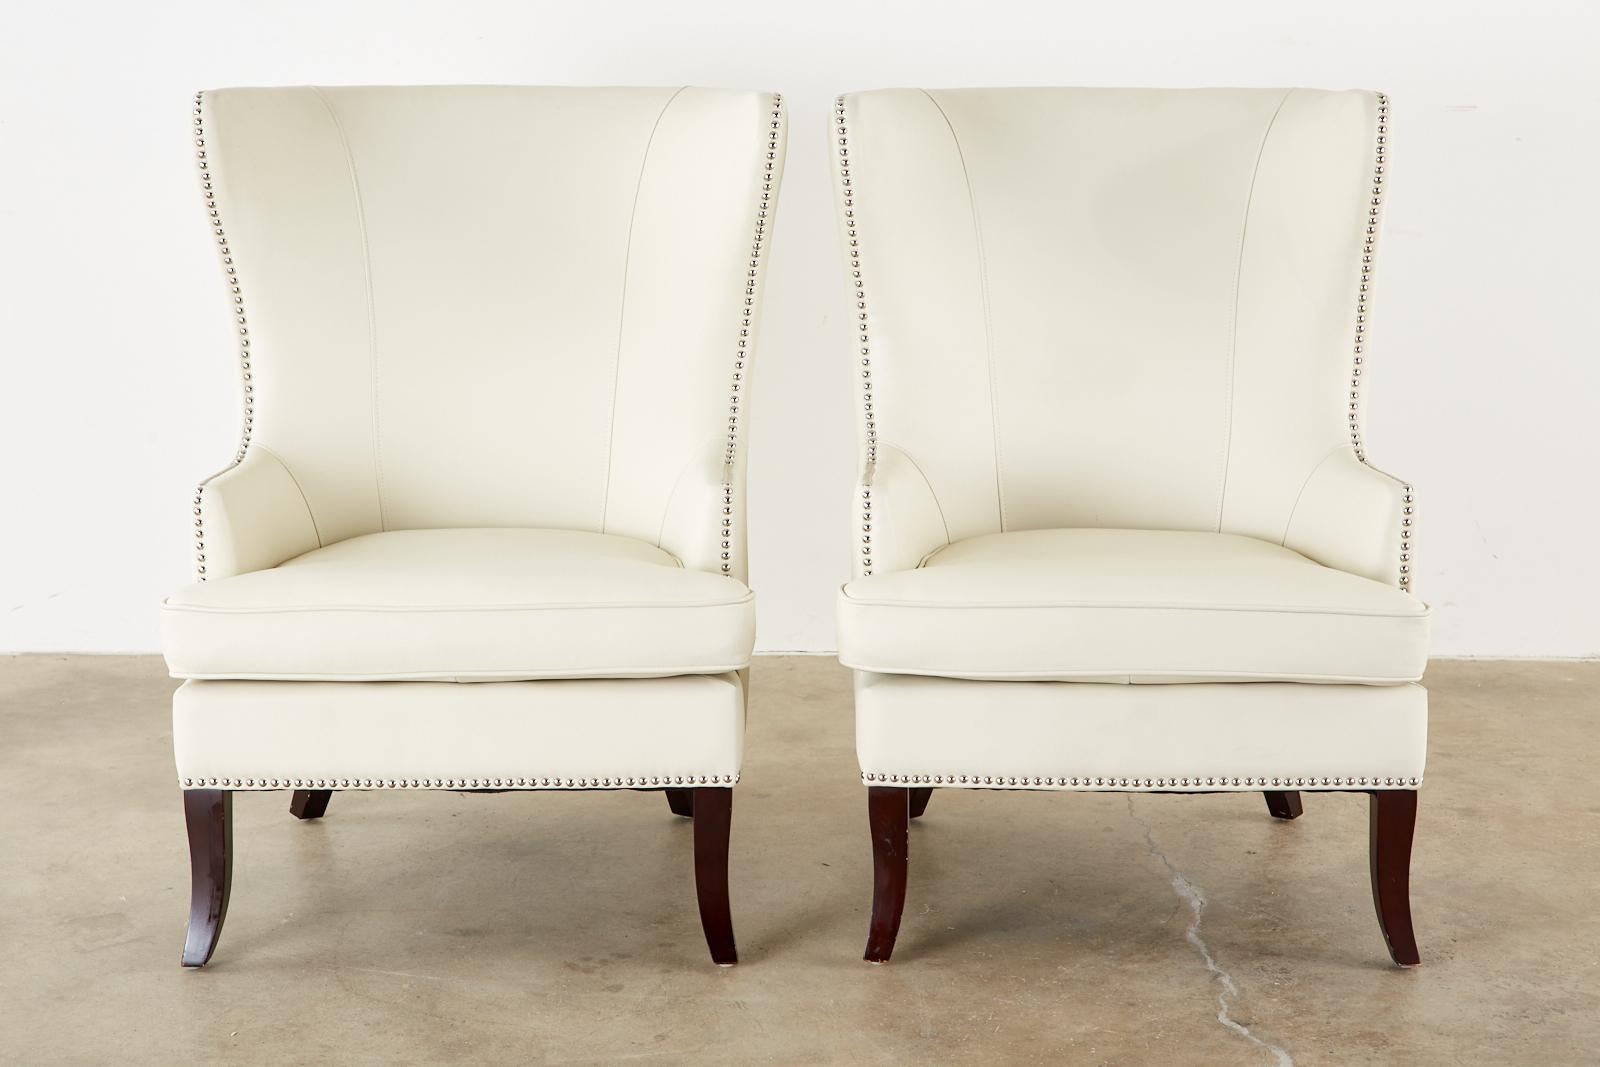 Stunning pair of modern style wing chairs or lounge chairs featuring a dramatic white leatherette upholstery. Crafted with hardwood frames and decorated with nickel finished brass tack nail heads on the borders. Fitted with a conforming loose seat